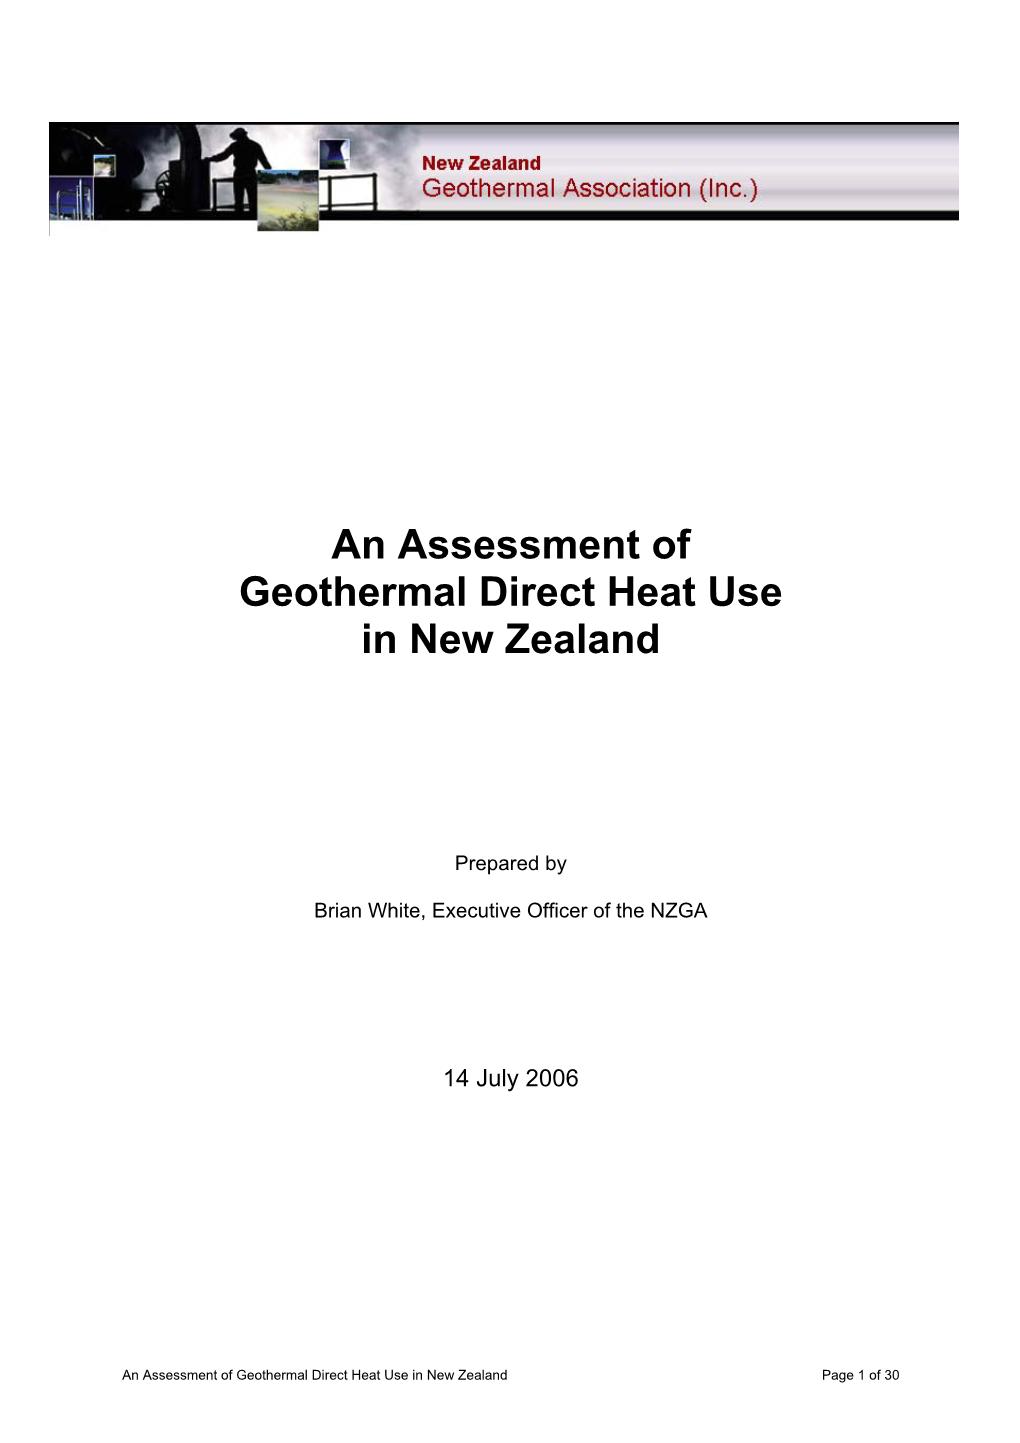 An Assessment of Geothermal Direct Heat Use in New Zealand